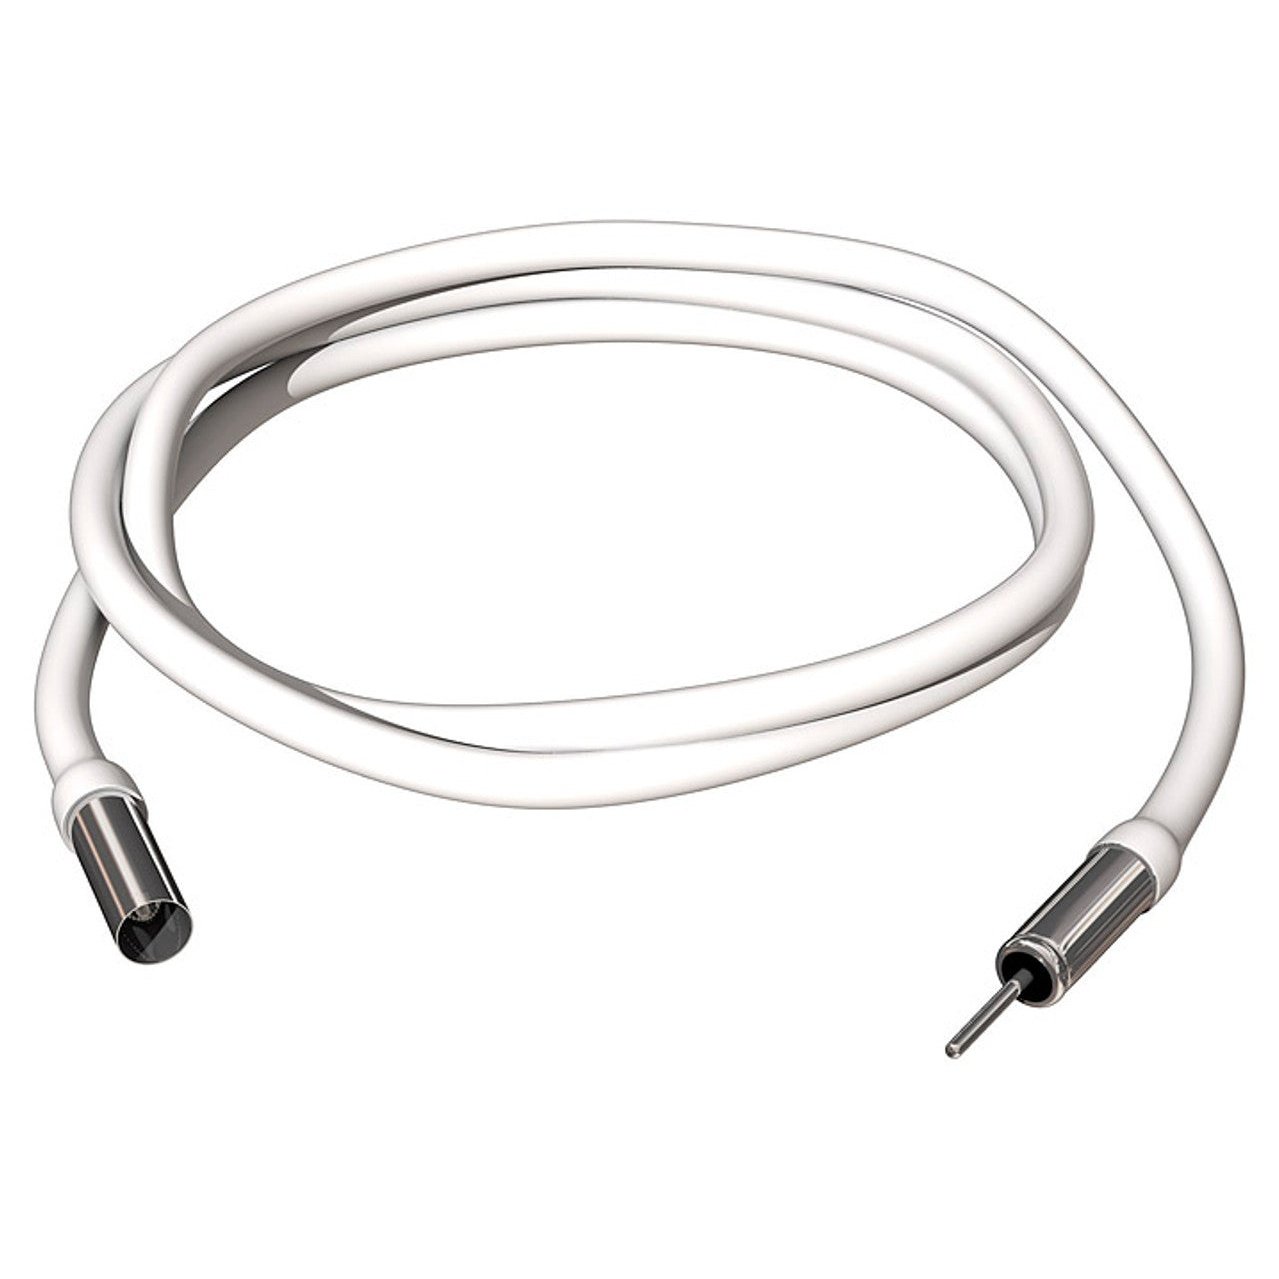 SHAKESPEARE 4352 10 FT AM/FM EXT. CABLE